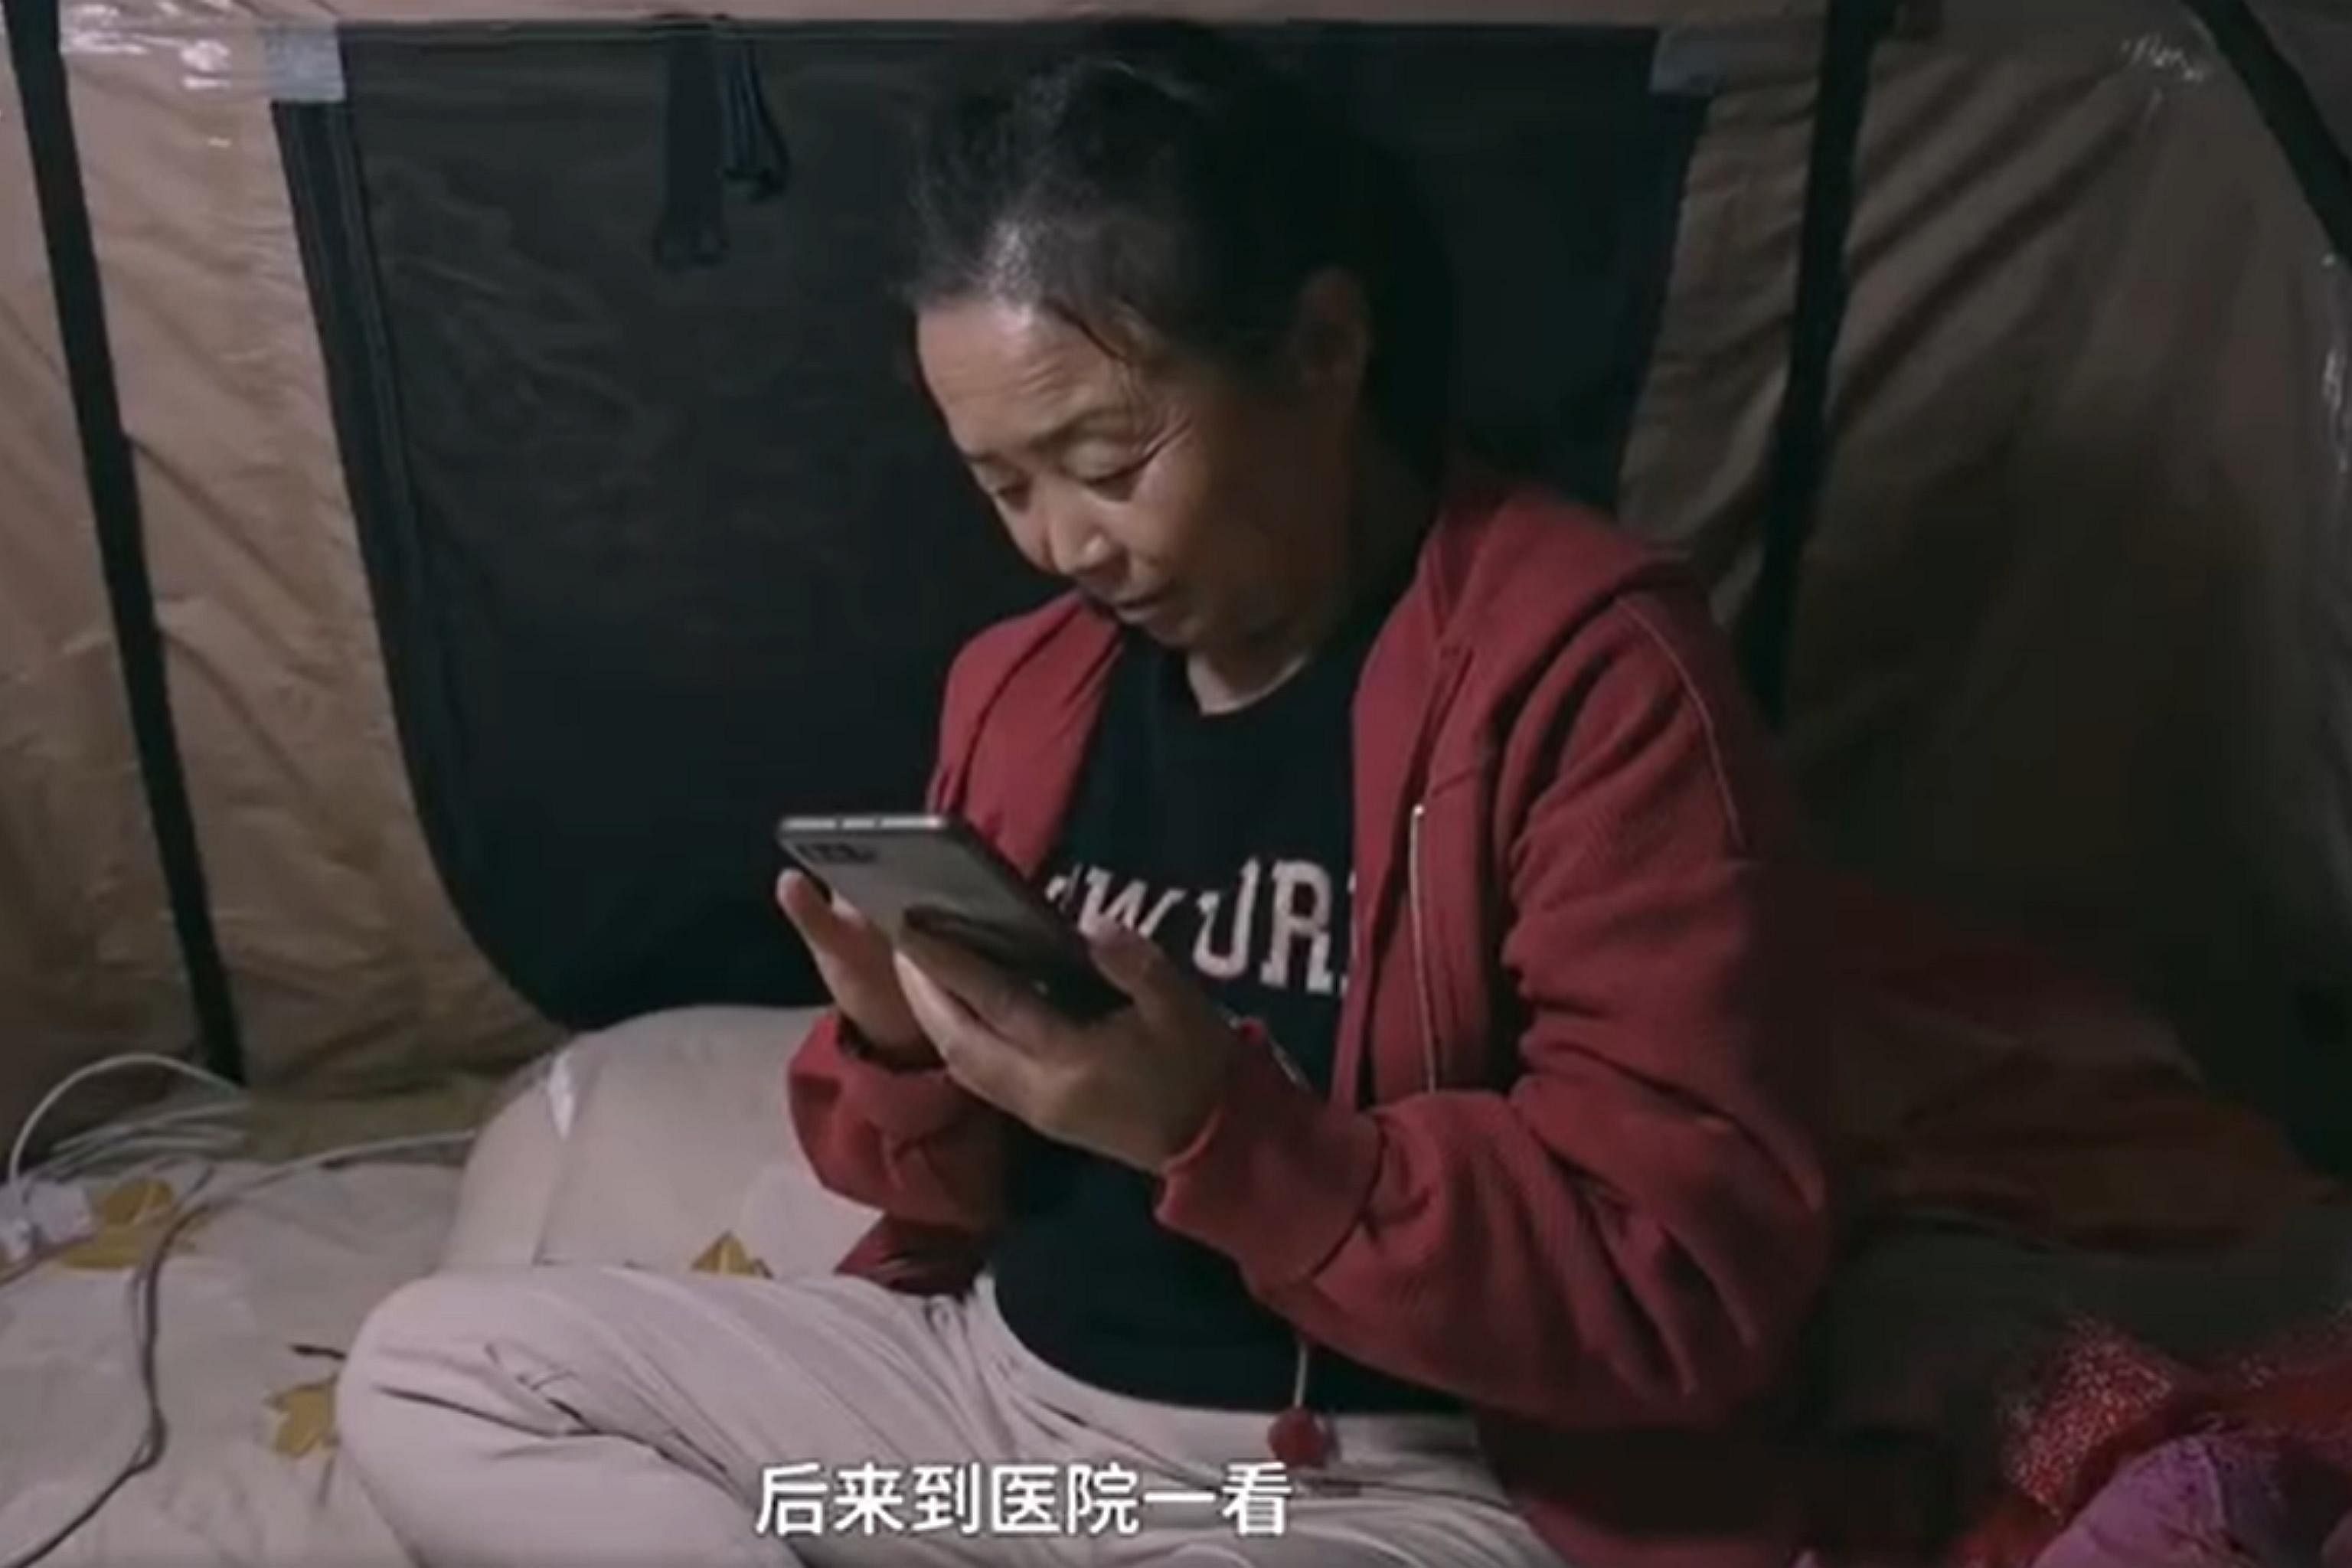 Chinese Auntie Who Went On A Solo Road Trip Became Feminist Icon